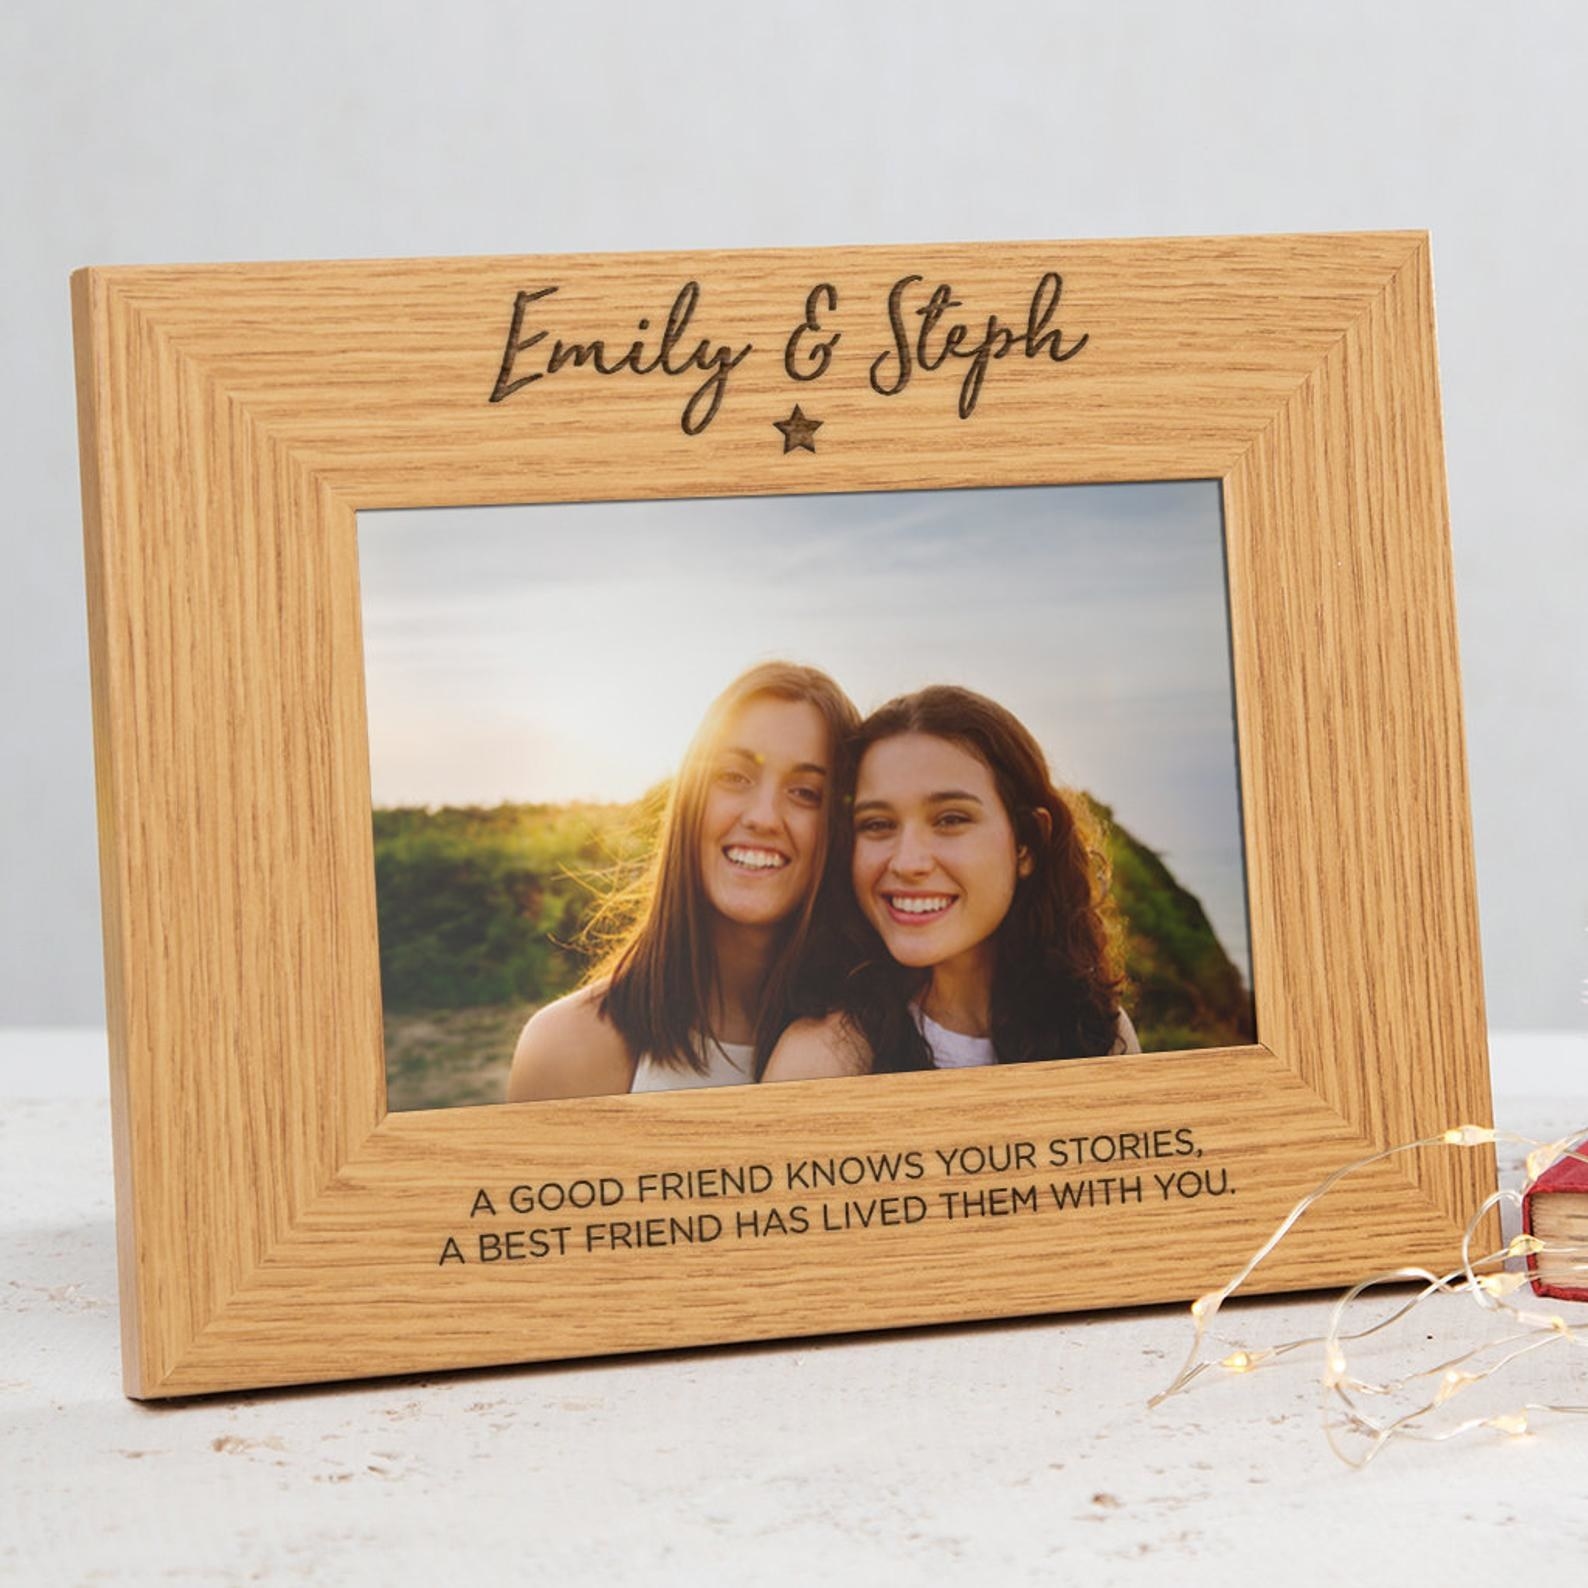 a rectangular wooden picture frame with the names &quot;Emily and Steph&quot; at the top and a message on the bottom saying, &quot;A good friend knows your stories. A best friend has lived them with you.&quot;